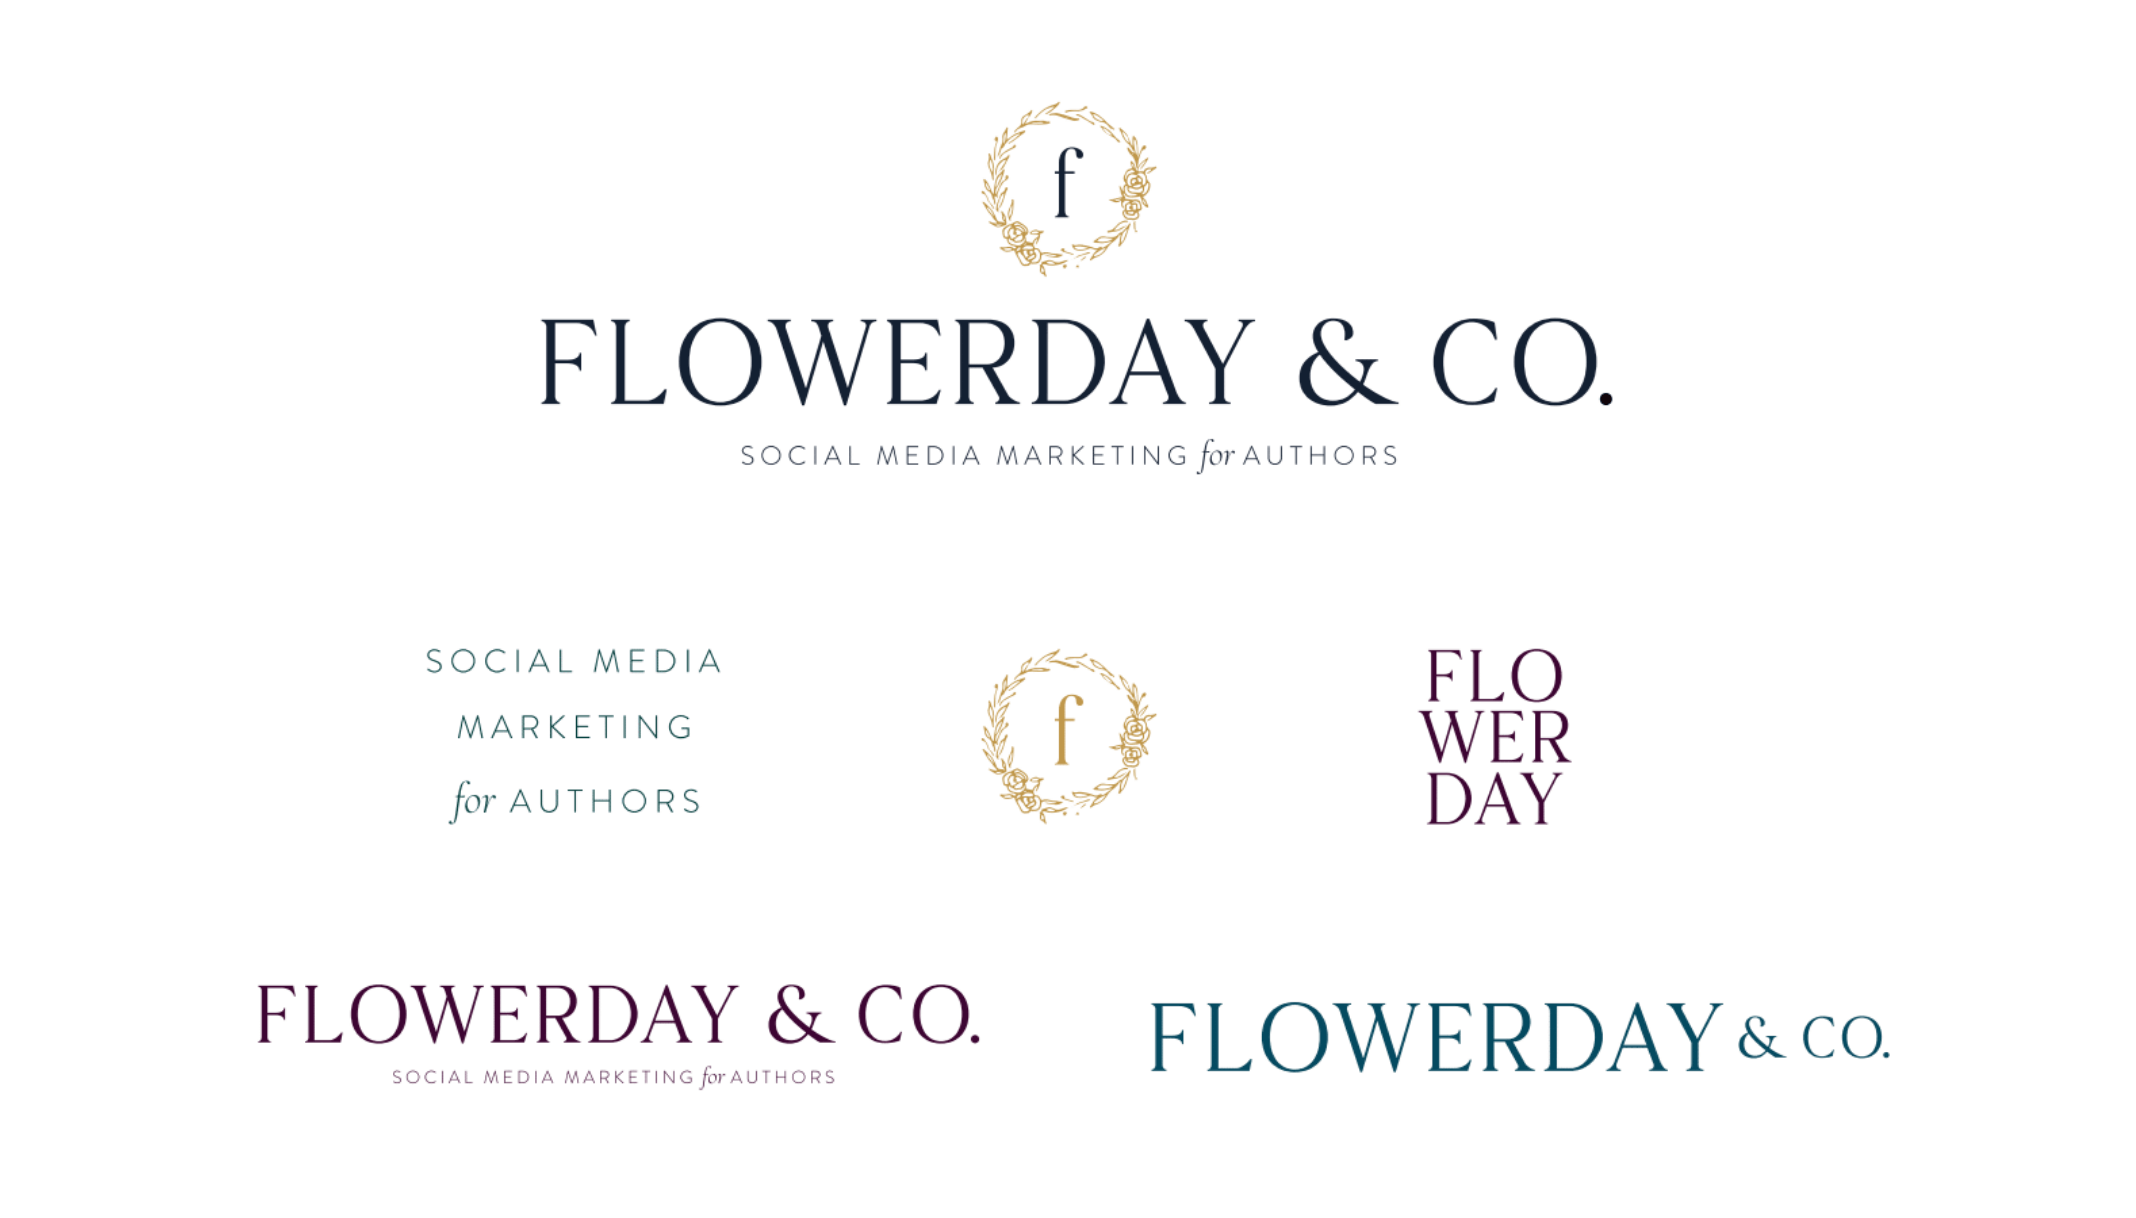 Brand refresh for Flowerday & Co. by Alexa B. Taylor